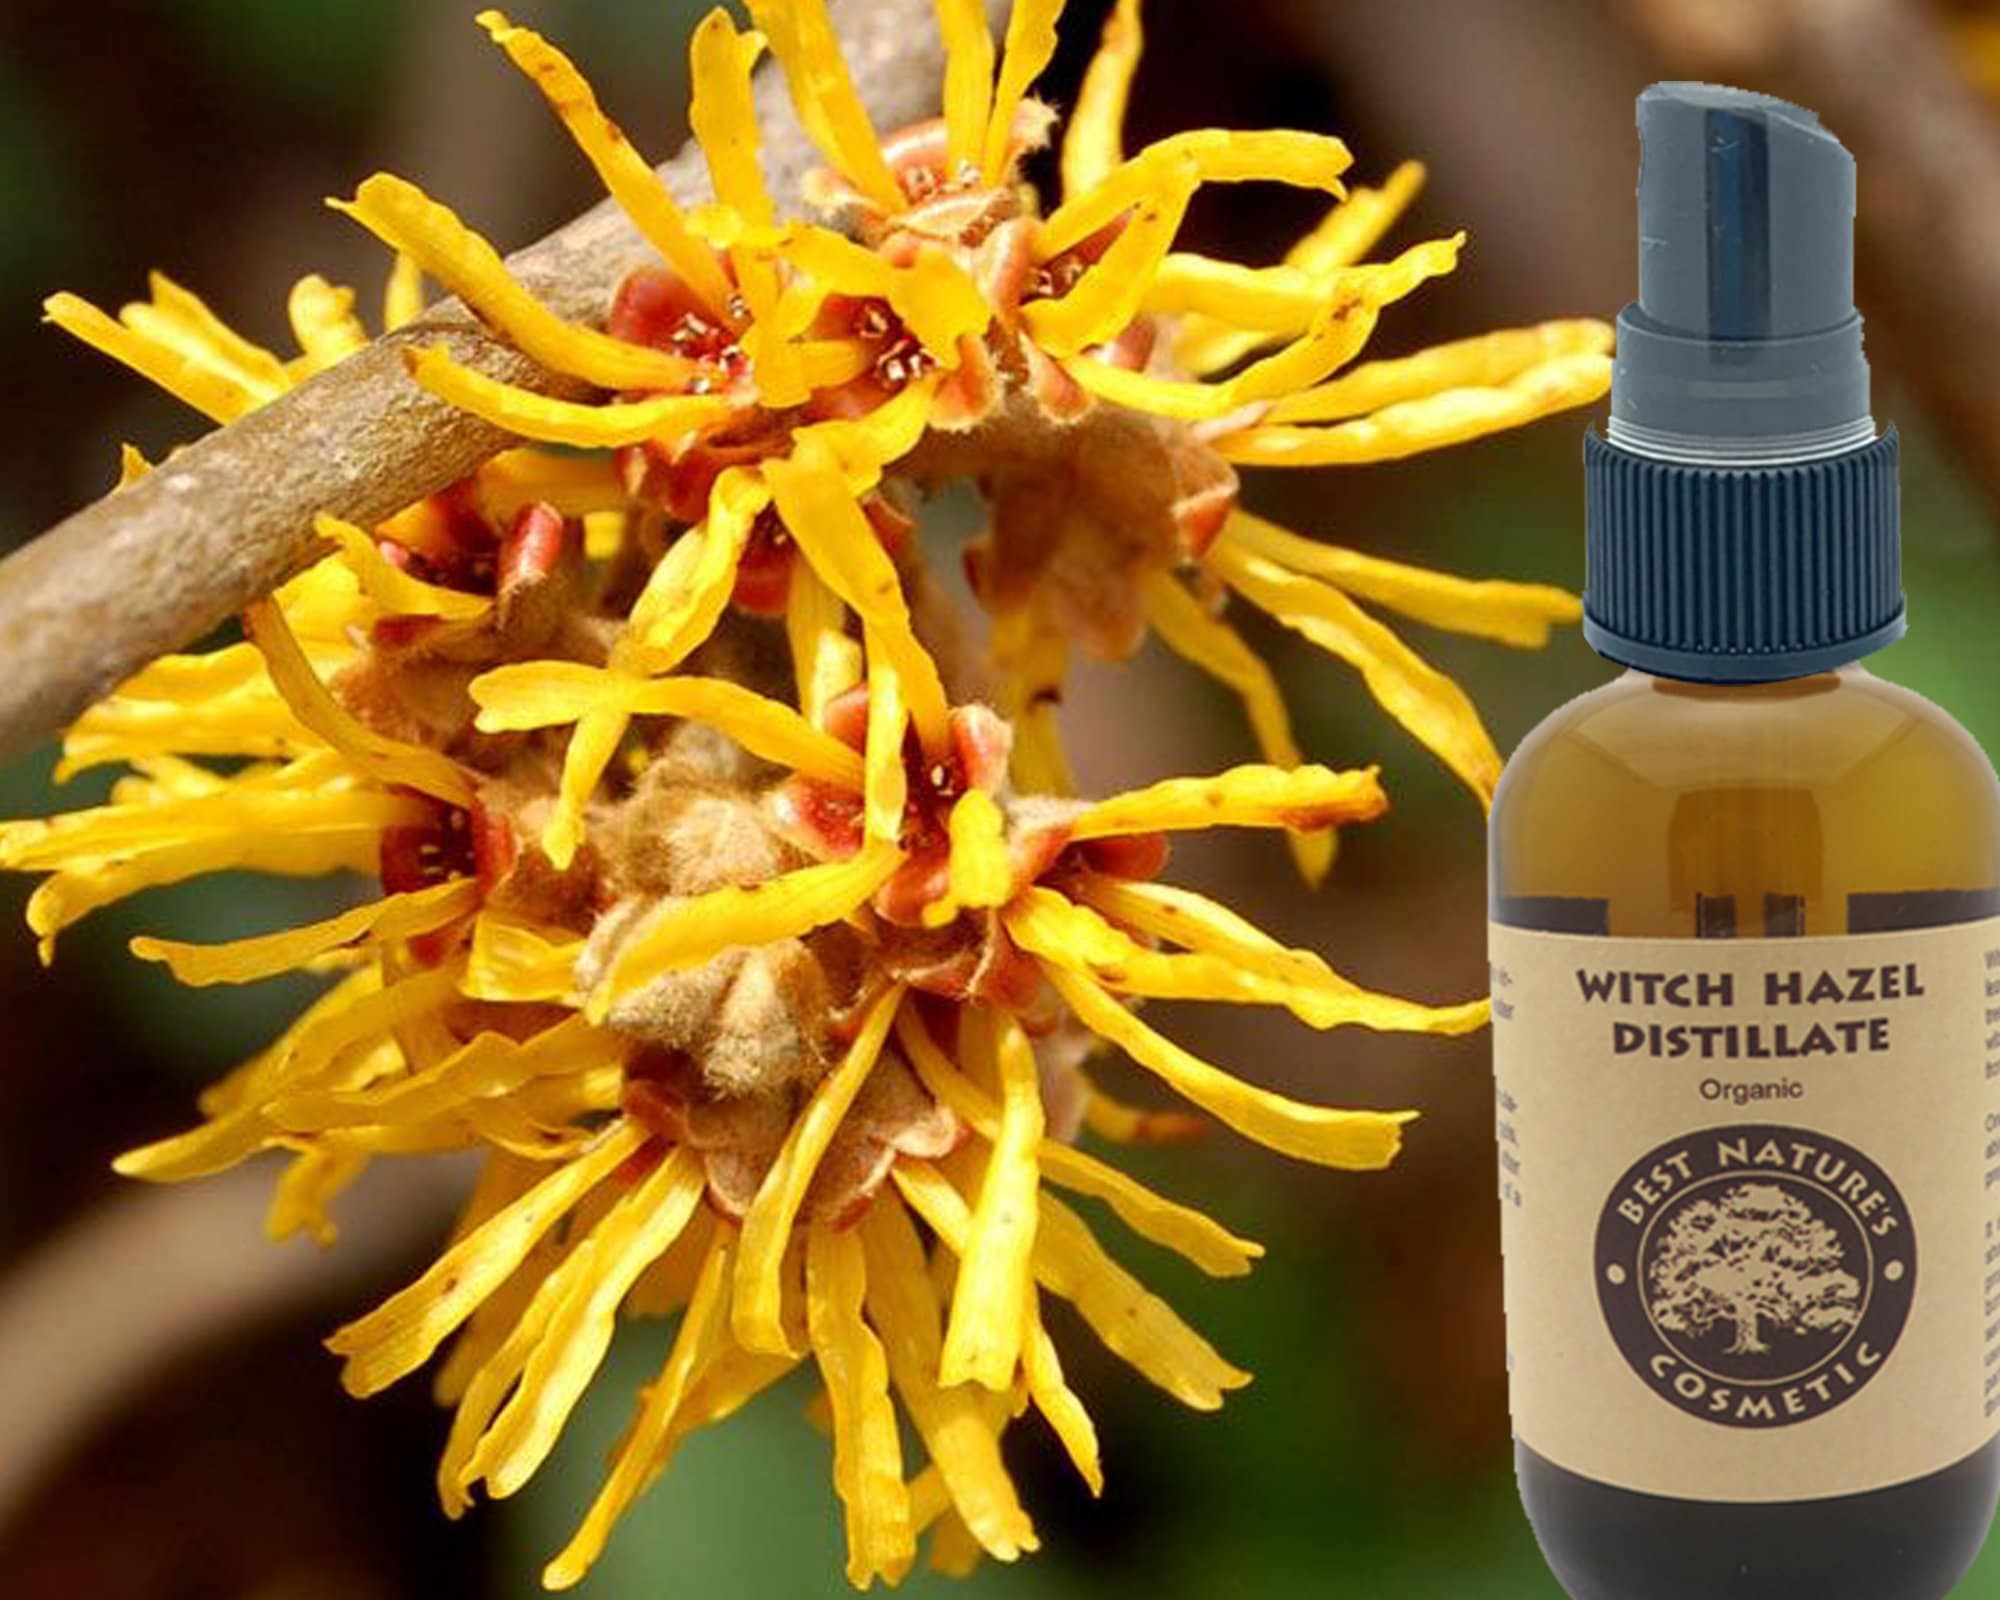 Witch Hazel Distillate Organic Use as a Skin Tonic After